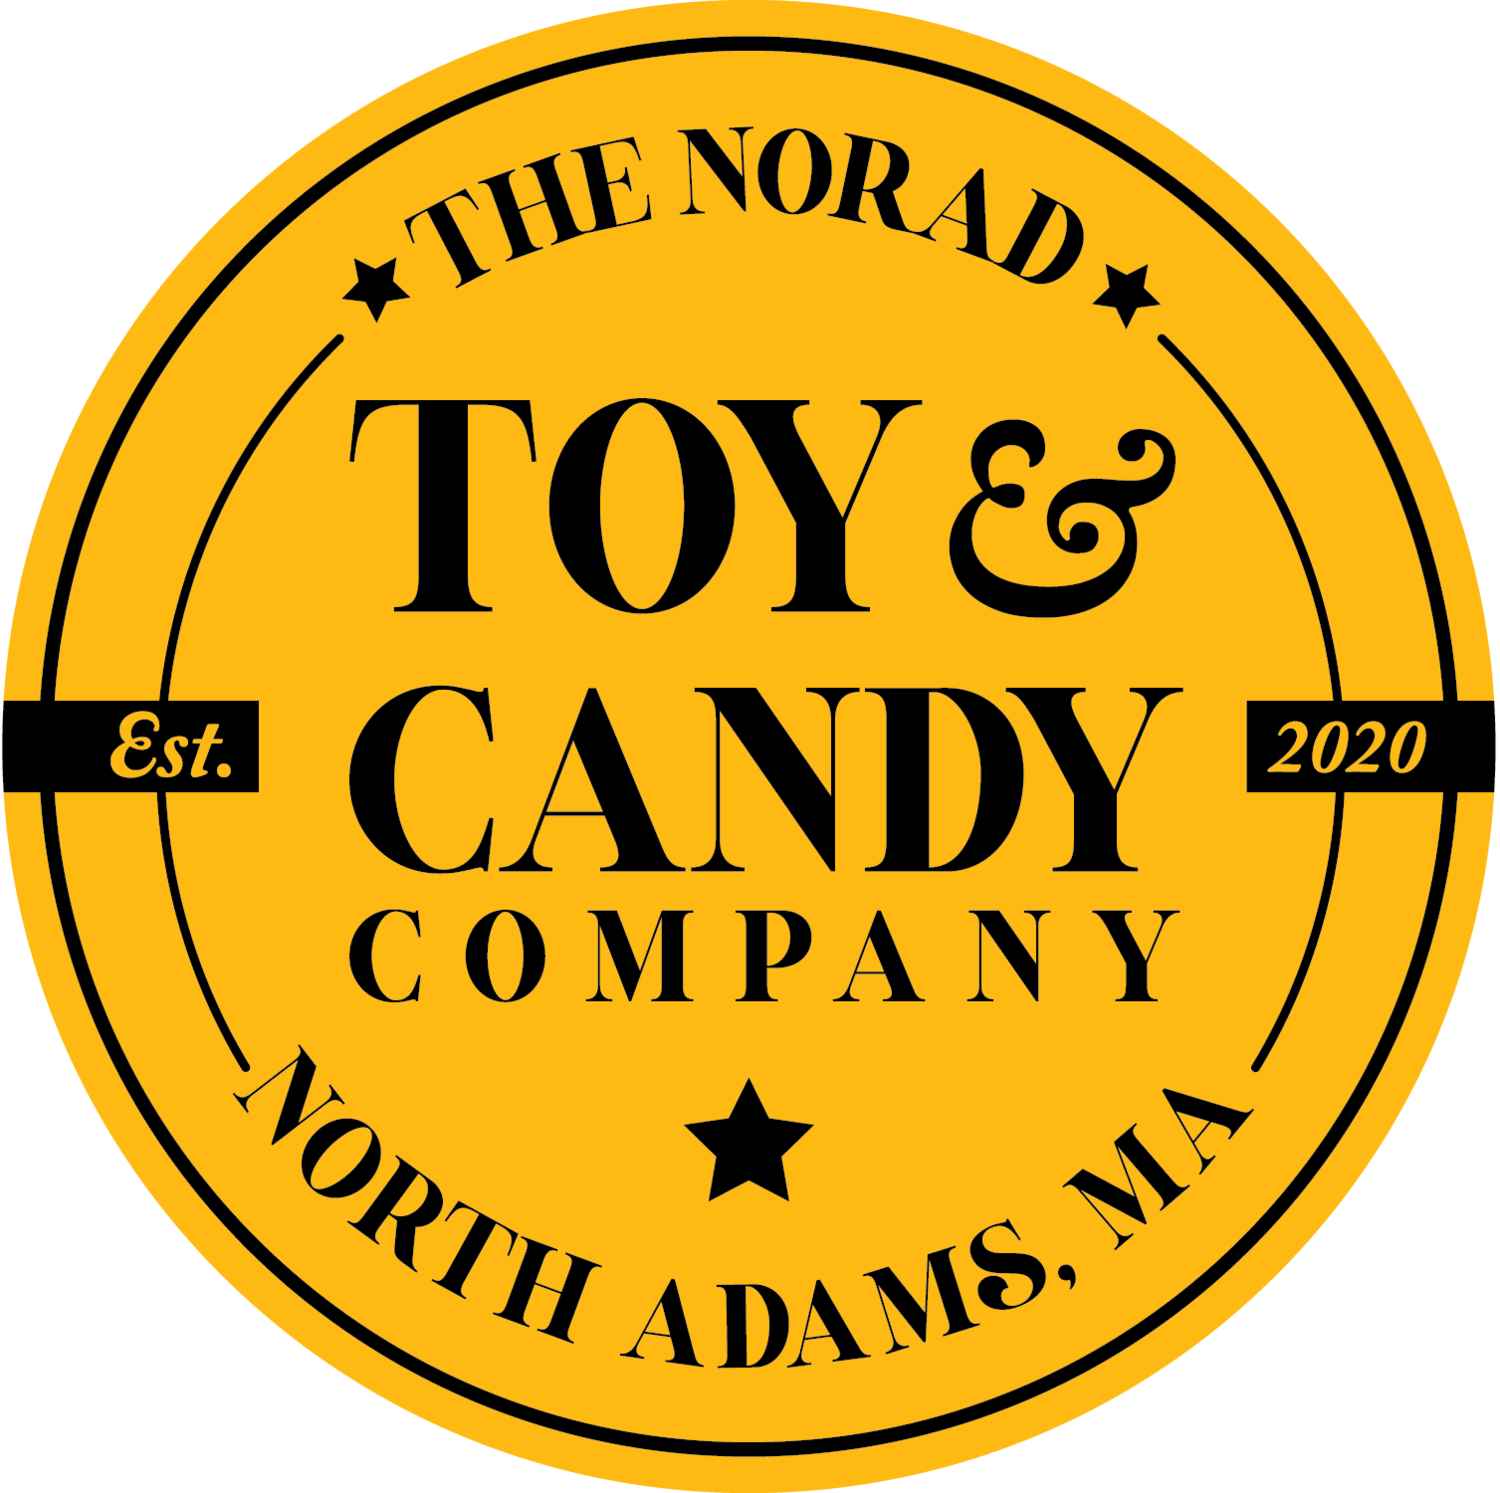 The Norad Toy &amp; Candy Company